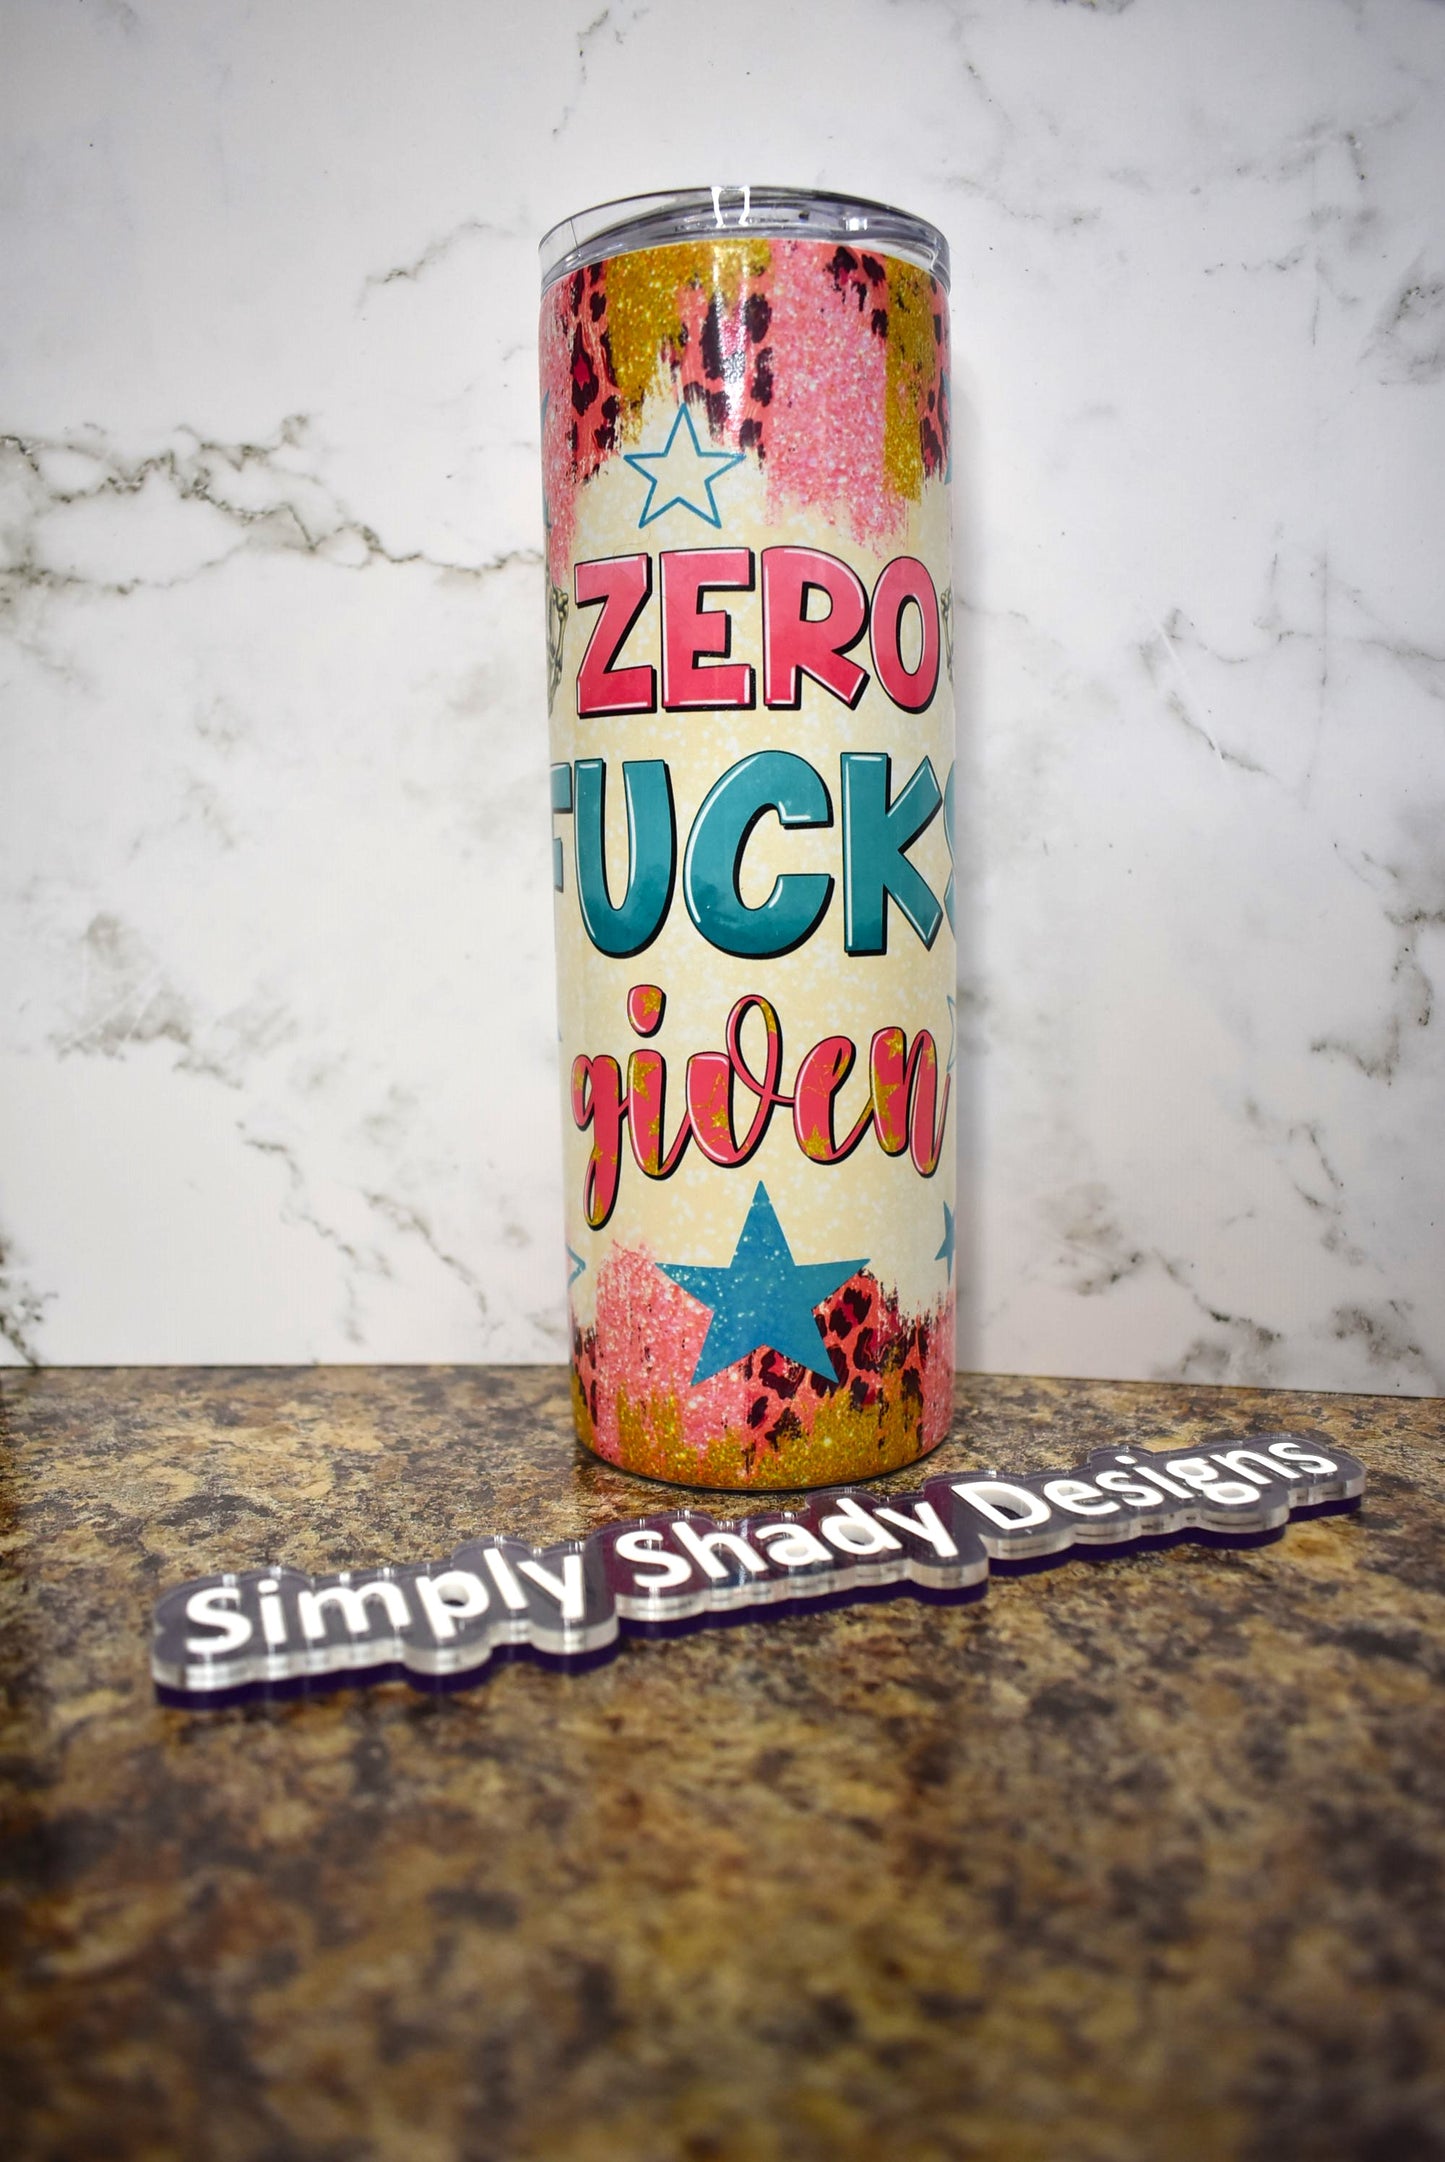 20 oz Makerflo Brand Stainless Steel tumbler with a bit of an attitude...We have all been there with that Zero Fucks Given!